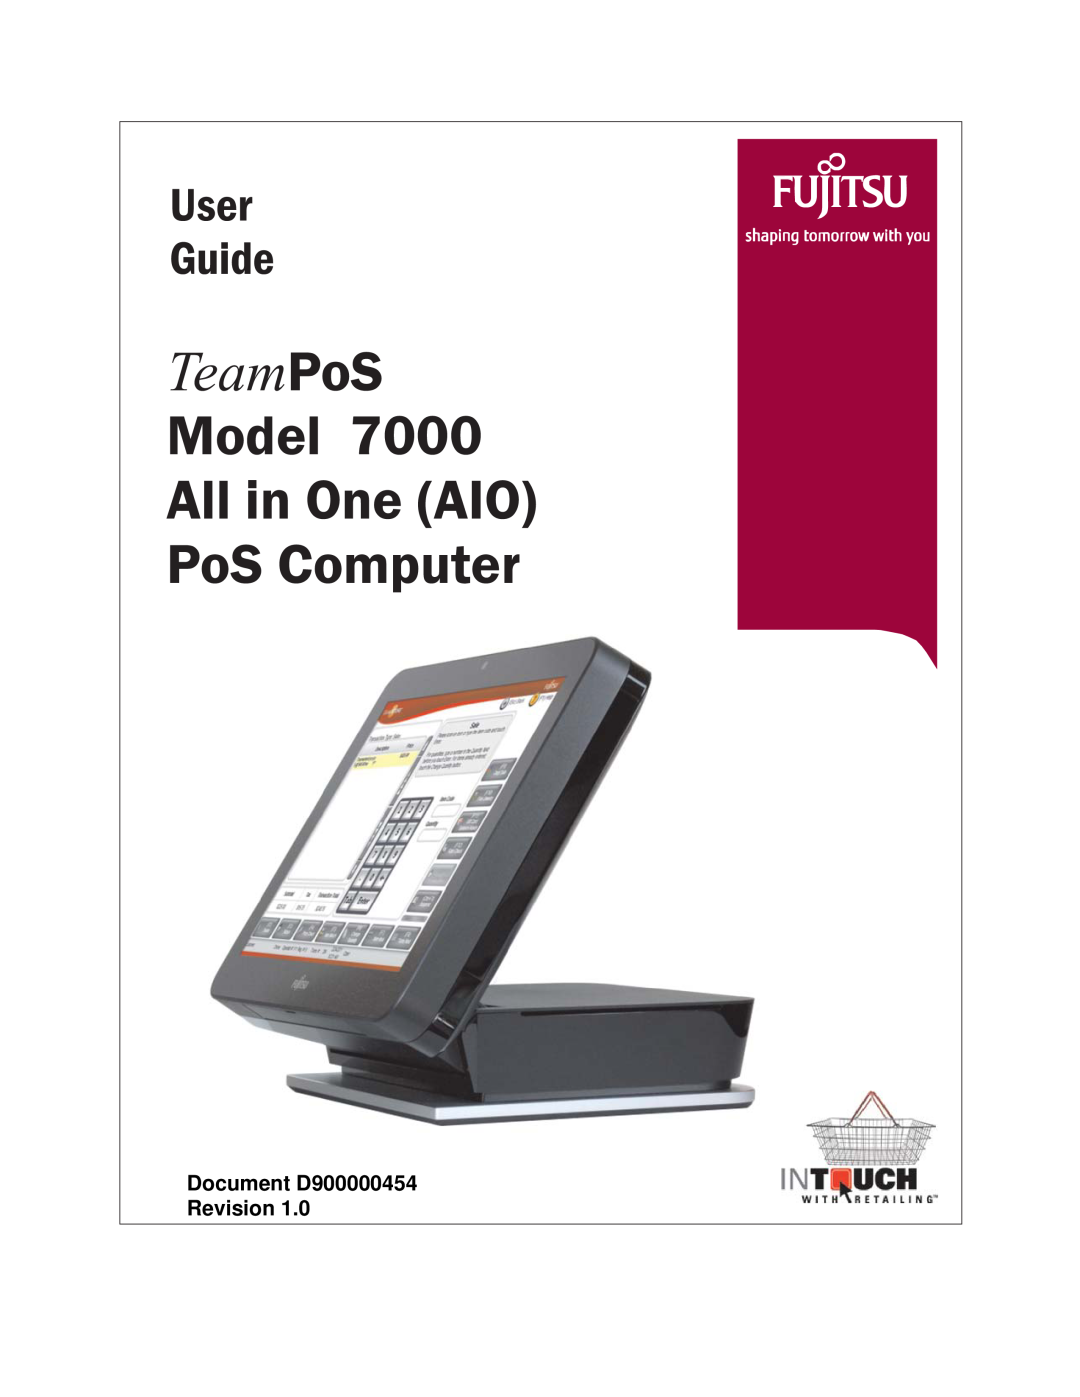 Fujitsu 7000 manual TeamPoS, Model All in One AIO PoS Computer, User Guide, Document D900000454 Revision 